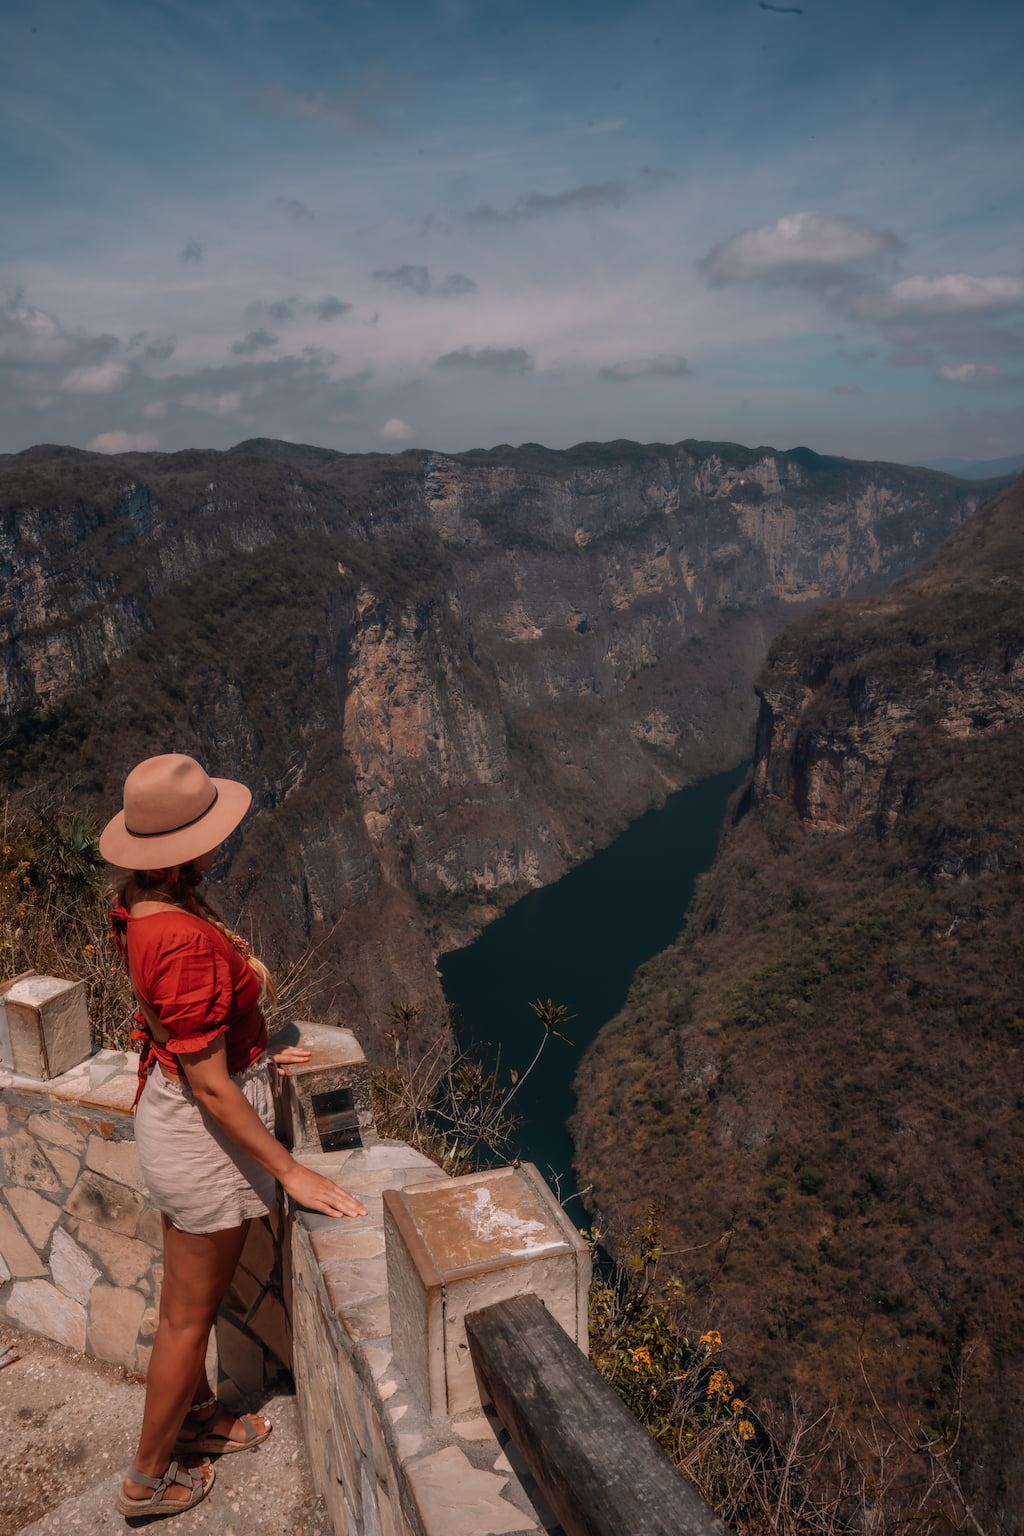 Sumidero Canyon from San Cristobal as part of 3 weeks in Mexico Itinerary.